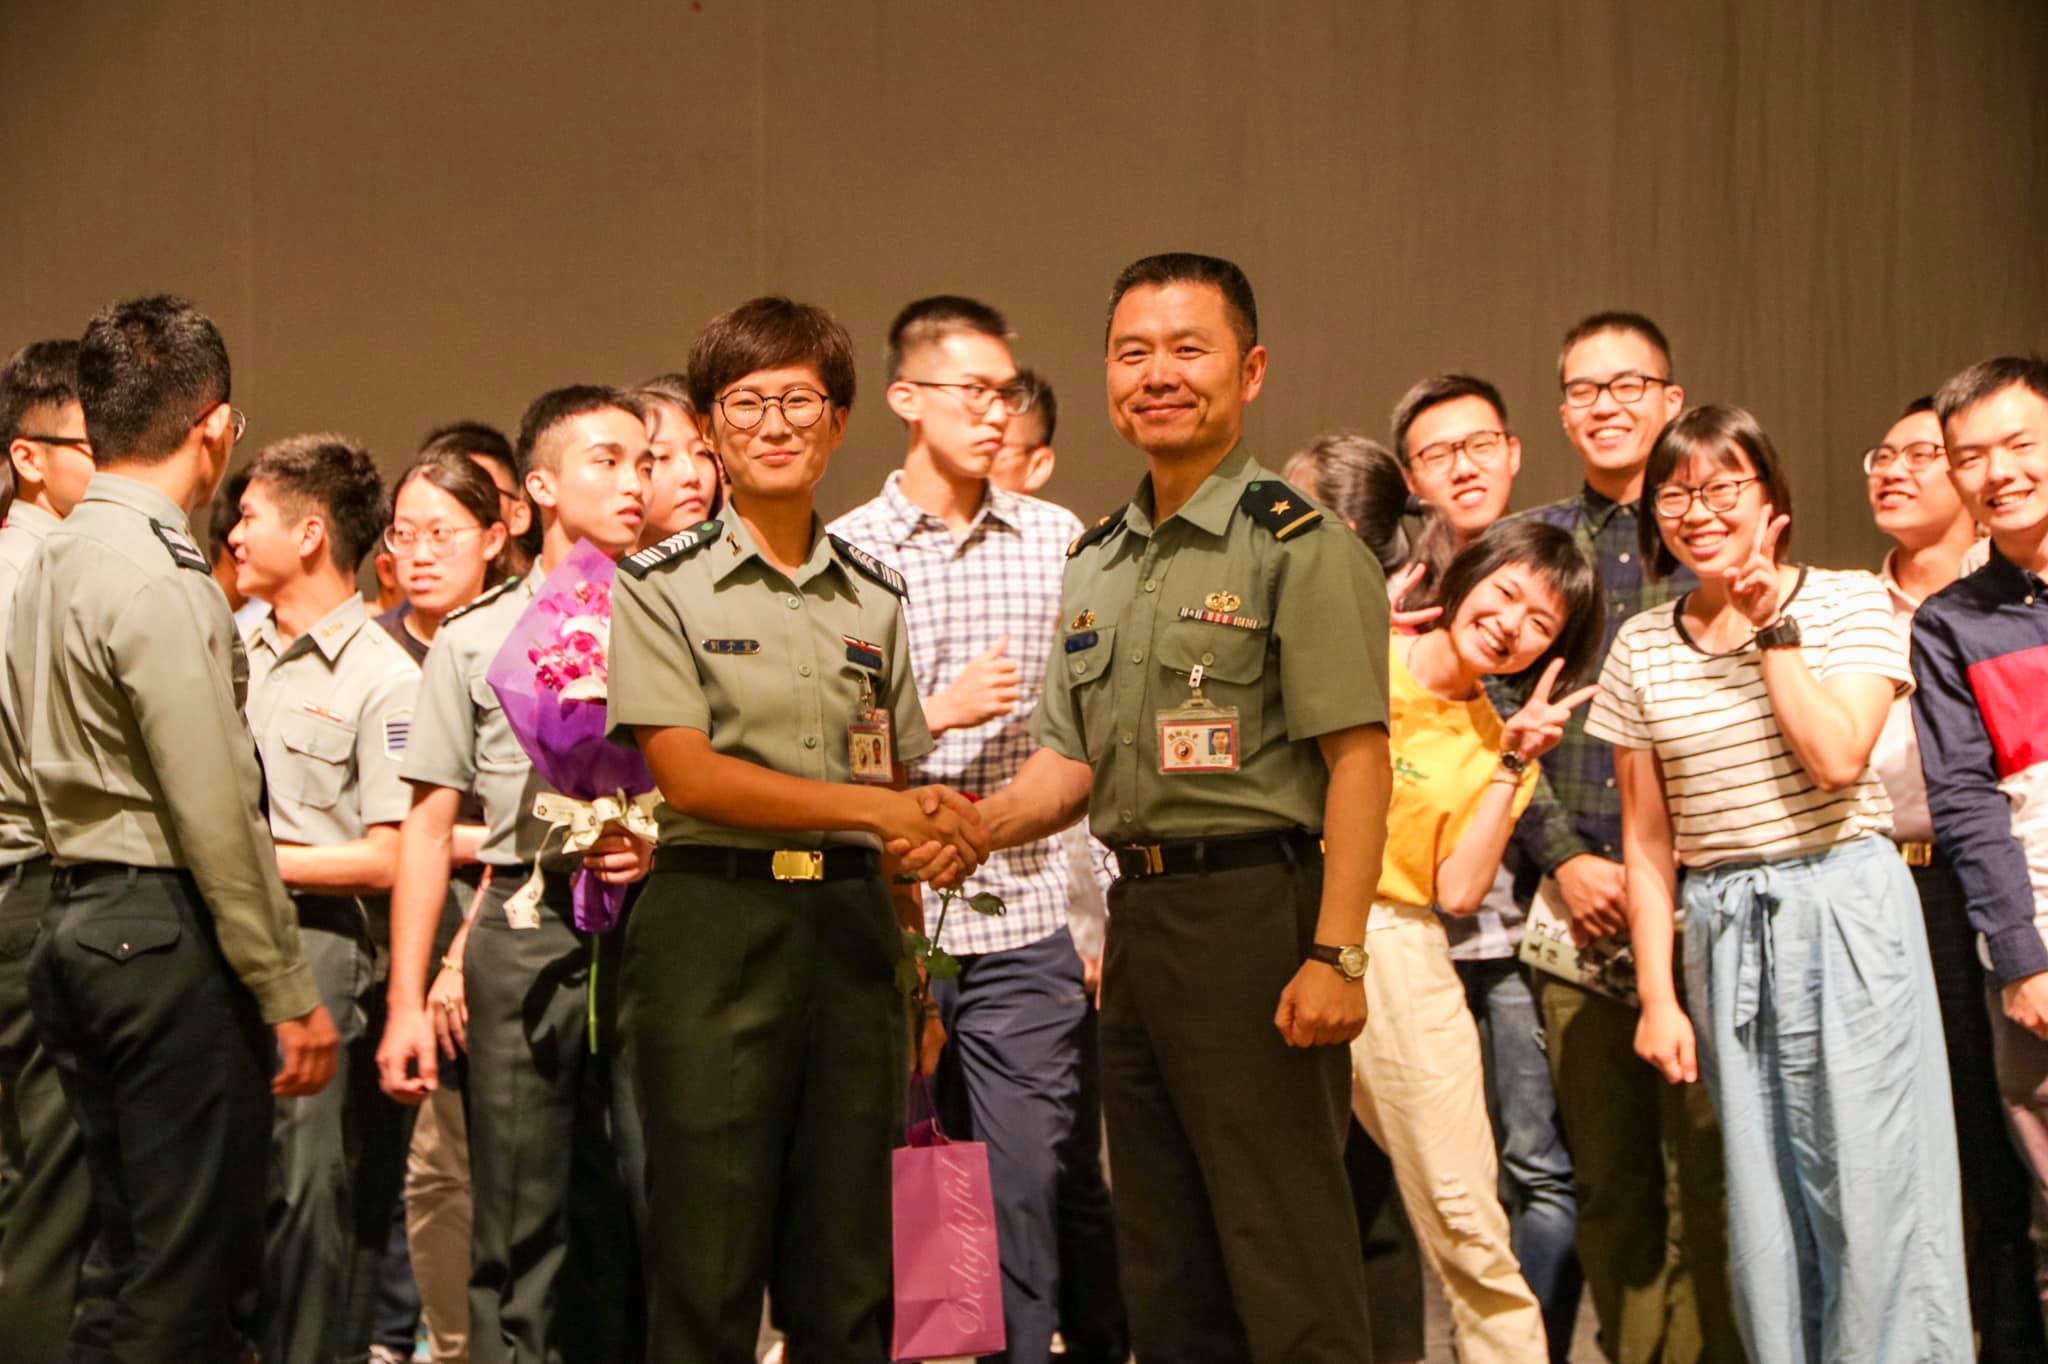 Major general Wen praise for the great performance of students.